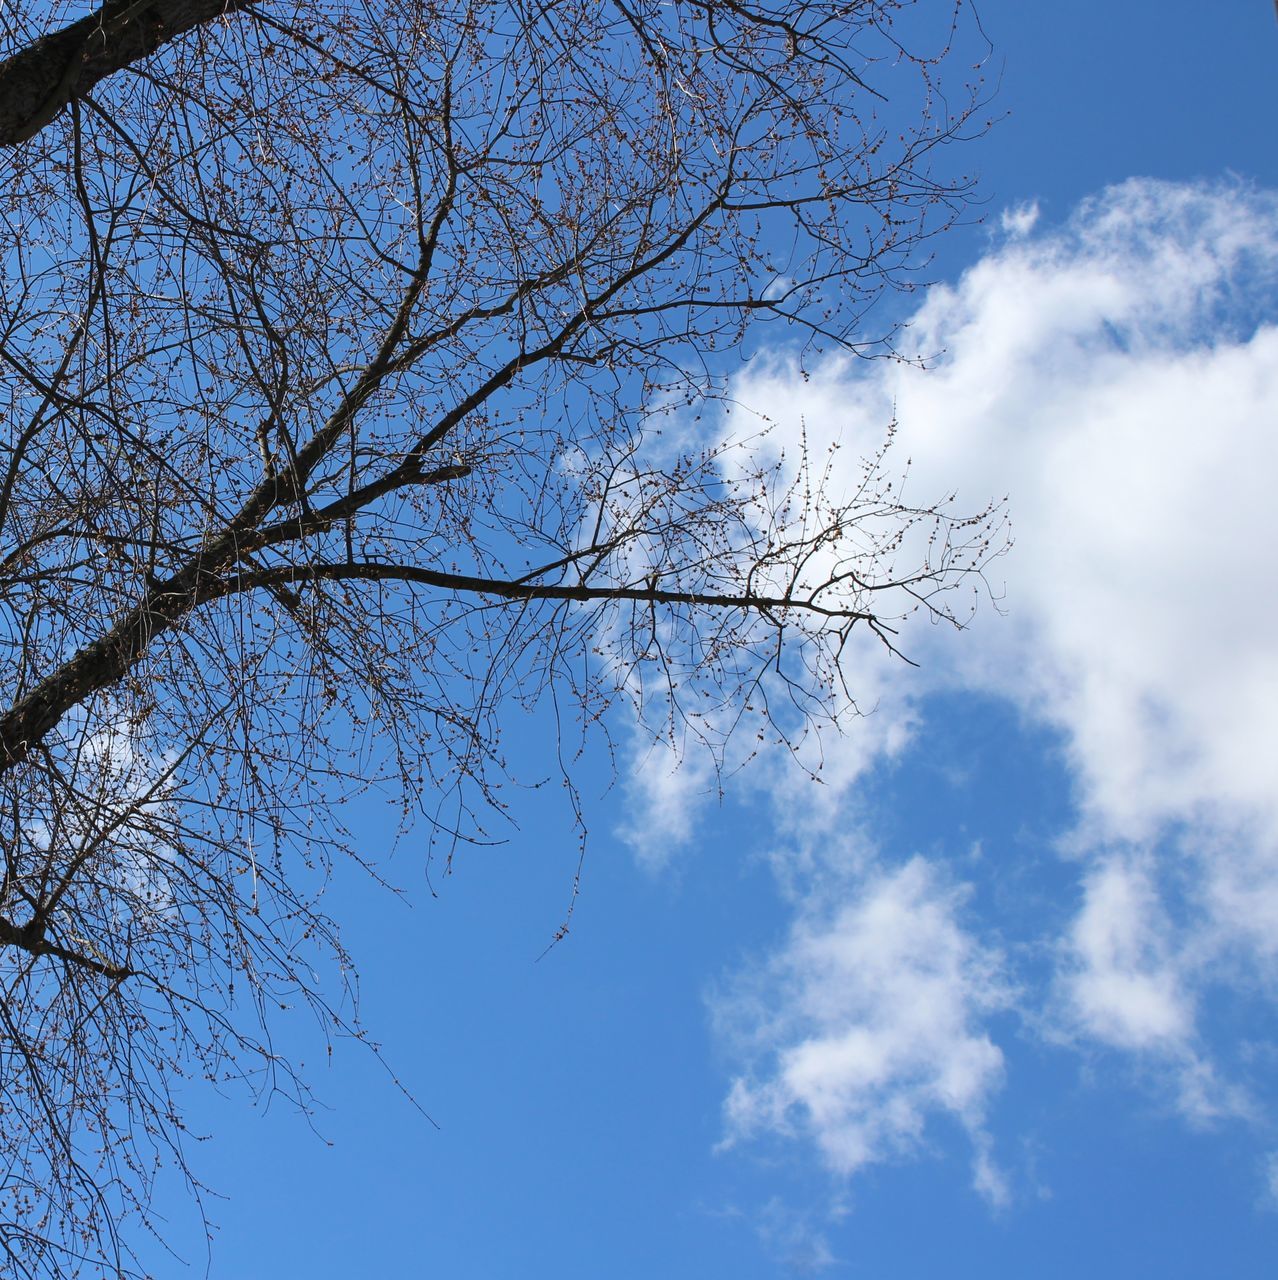 sky, low angle view, tree, branch, plant, cloud - sky, blue, beauty in nature, bare tree, nature, tranquility, day, no people, scenics - nature, outdoors, tranquil scene, growth, silhouette, sunlight, white color